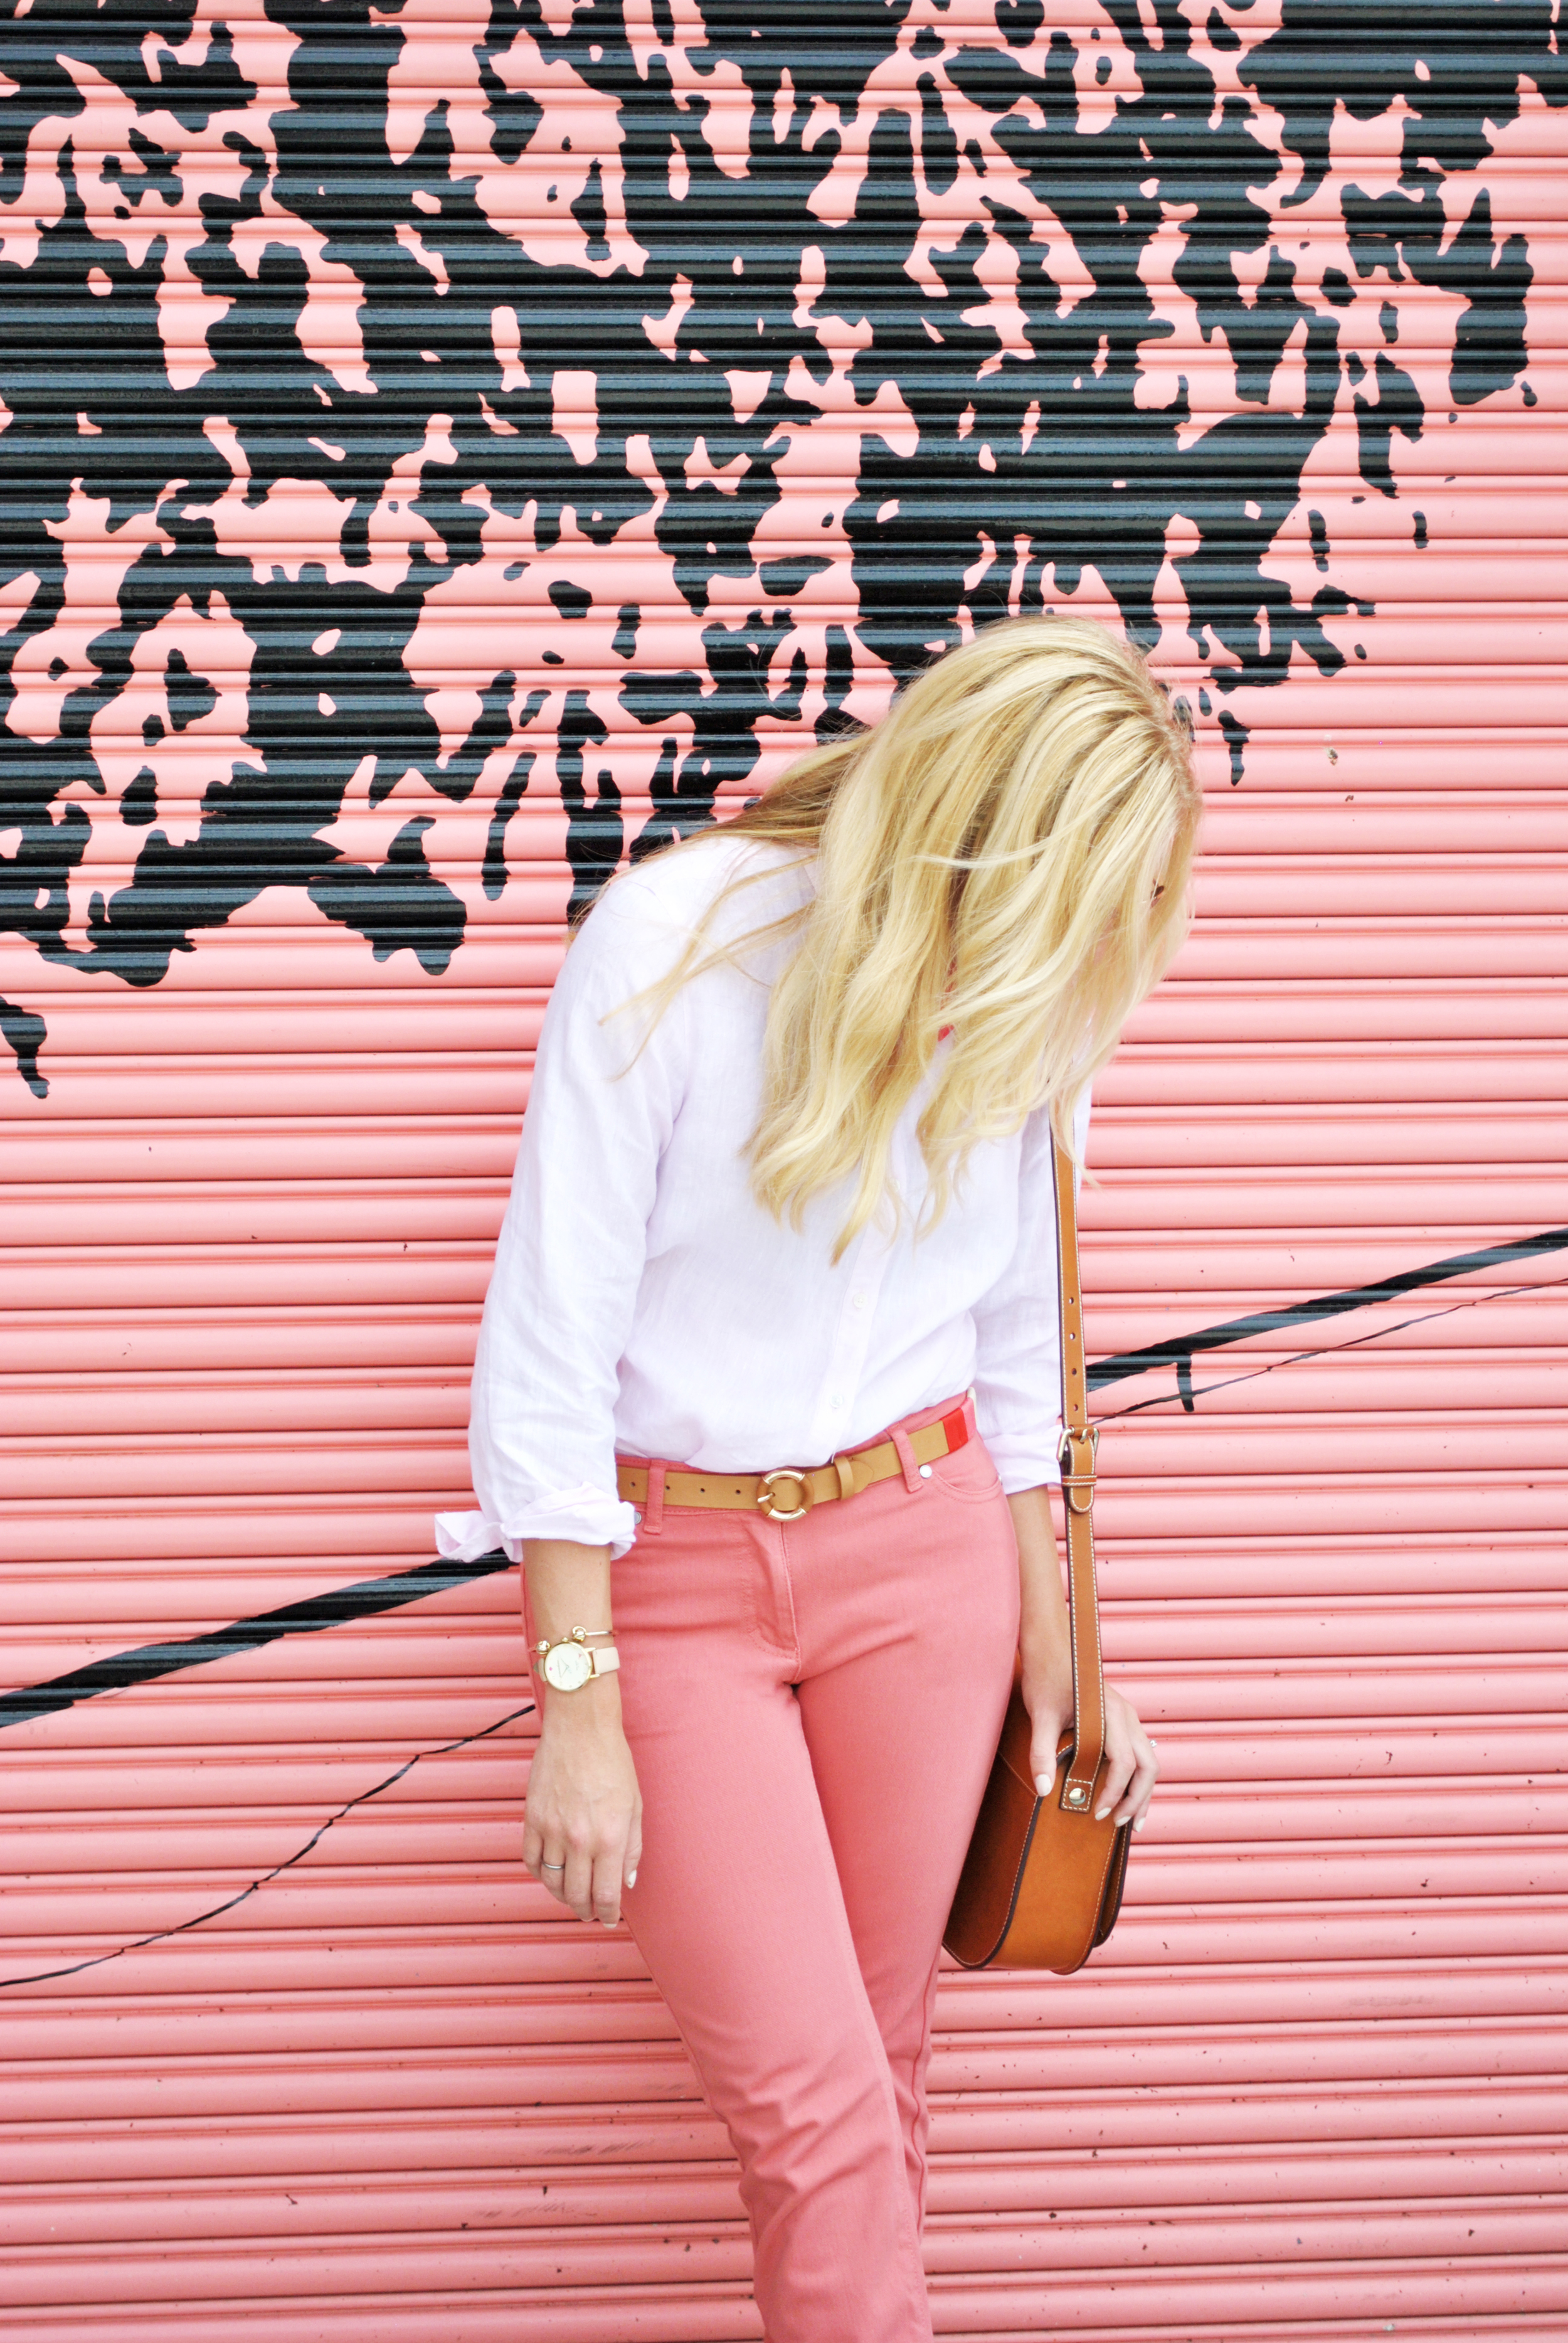 thoughtfulwish | preppy // school outfit // pink outfit // peach outfit // bowtie // j. mclaughlin // blonde fashion // fashion blogger // boston prep // boston fashion // new england fashion